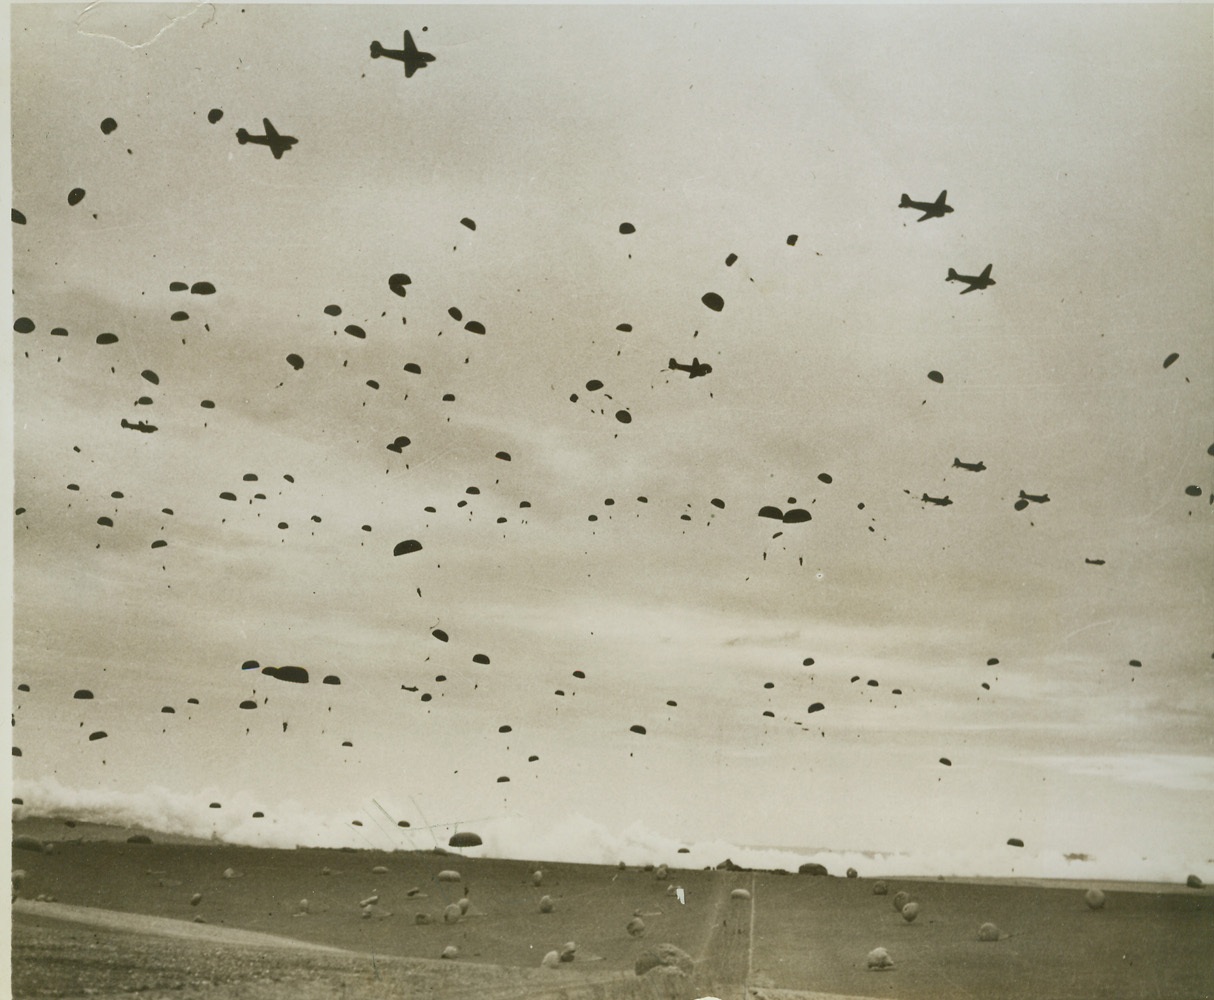 Parachute Maneuvers Over the United Kingdom, 3/31/1944. ENGLAND -- Hundreds of parachutes cover the ground and fill the air during recent maneuvers of the Ninth Air Force Troop Carrier Command in the United Kingdom. The T.C.C. transports men to combat area, evacuates wounded and carries airborne engineers and their equipment. Credit (Official AAF Photo from ACME);